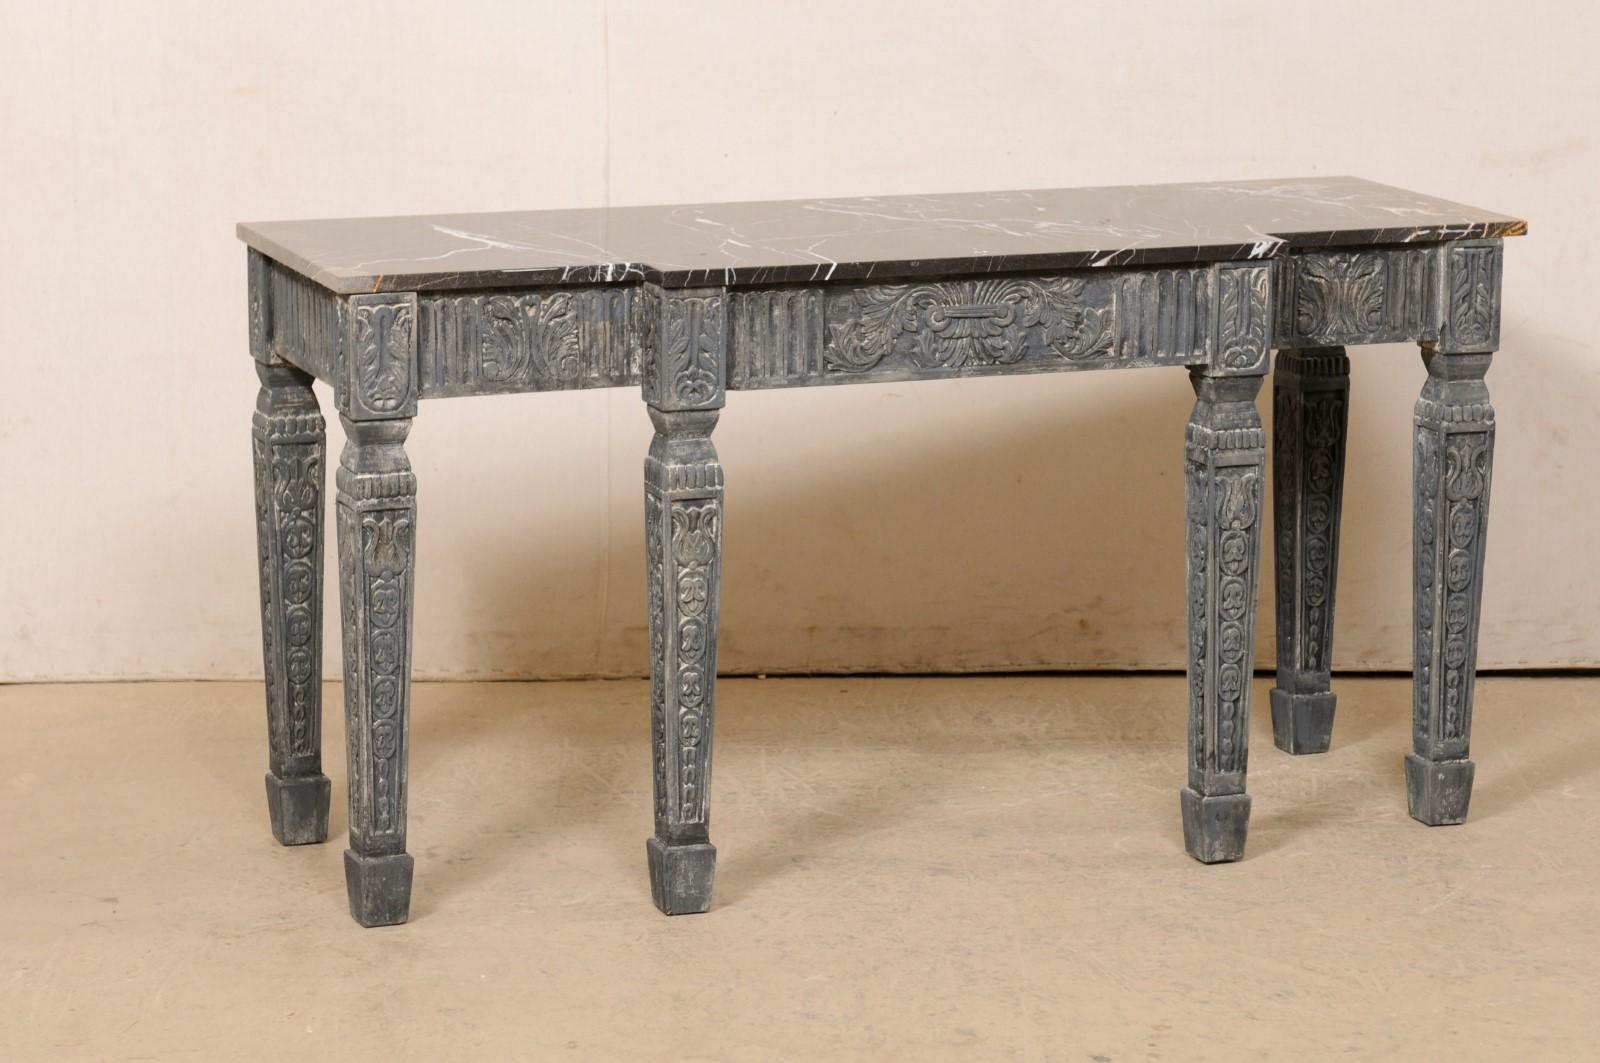 A French carved and painted wood console table with original marble top. This vintage table from France features a rectangular black marble top with white and rust veining (just shy of 5 feet in length), with a shallow break-front design at front